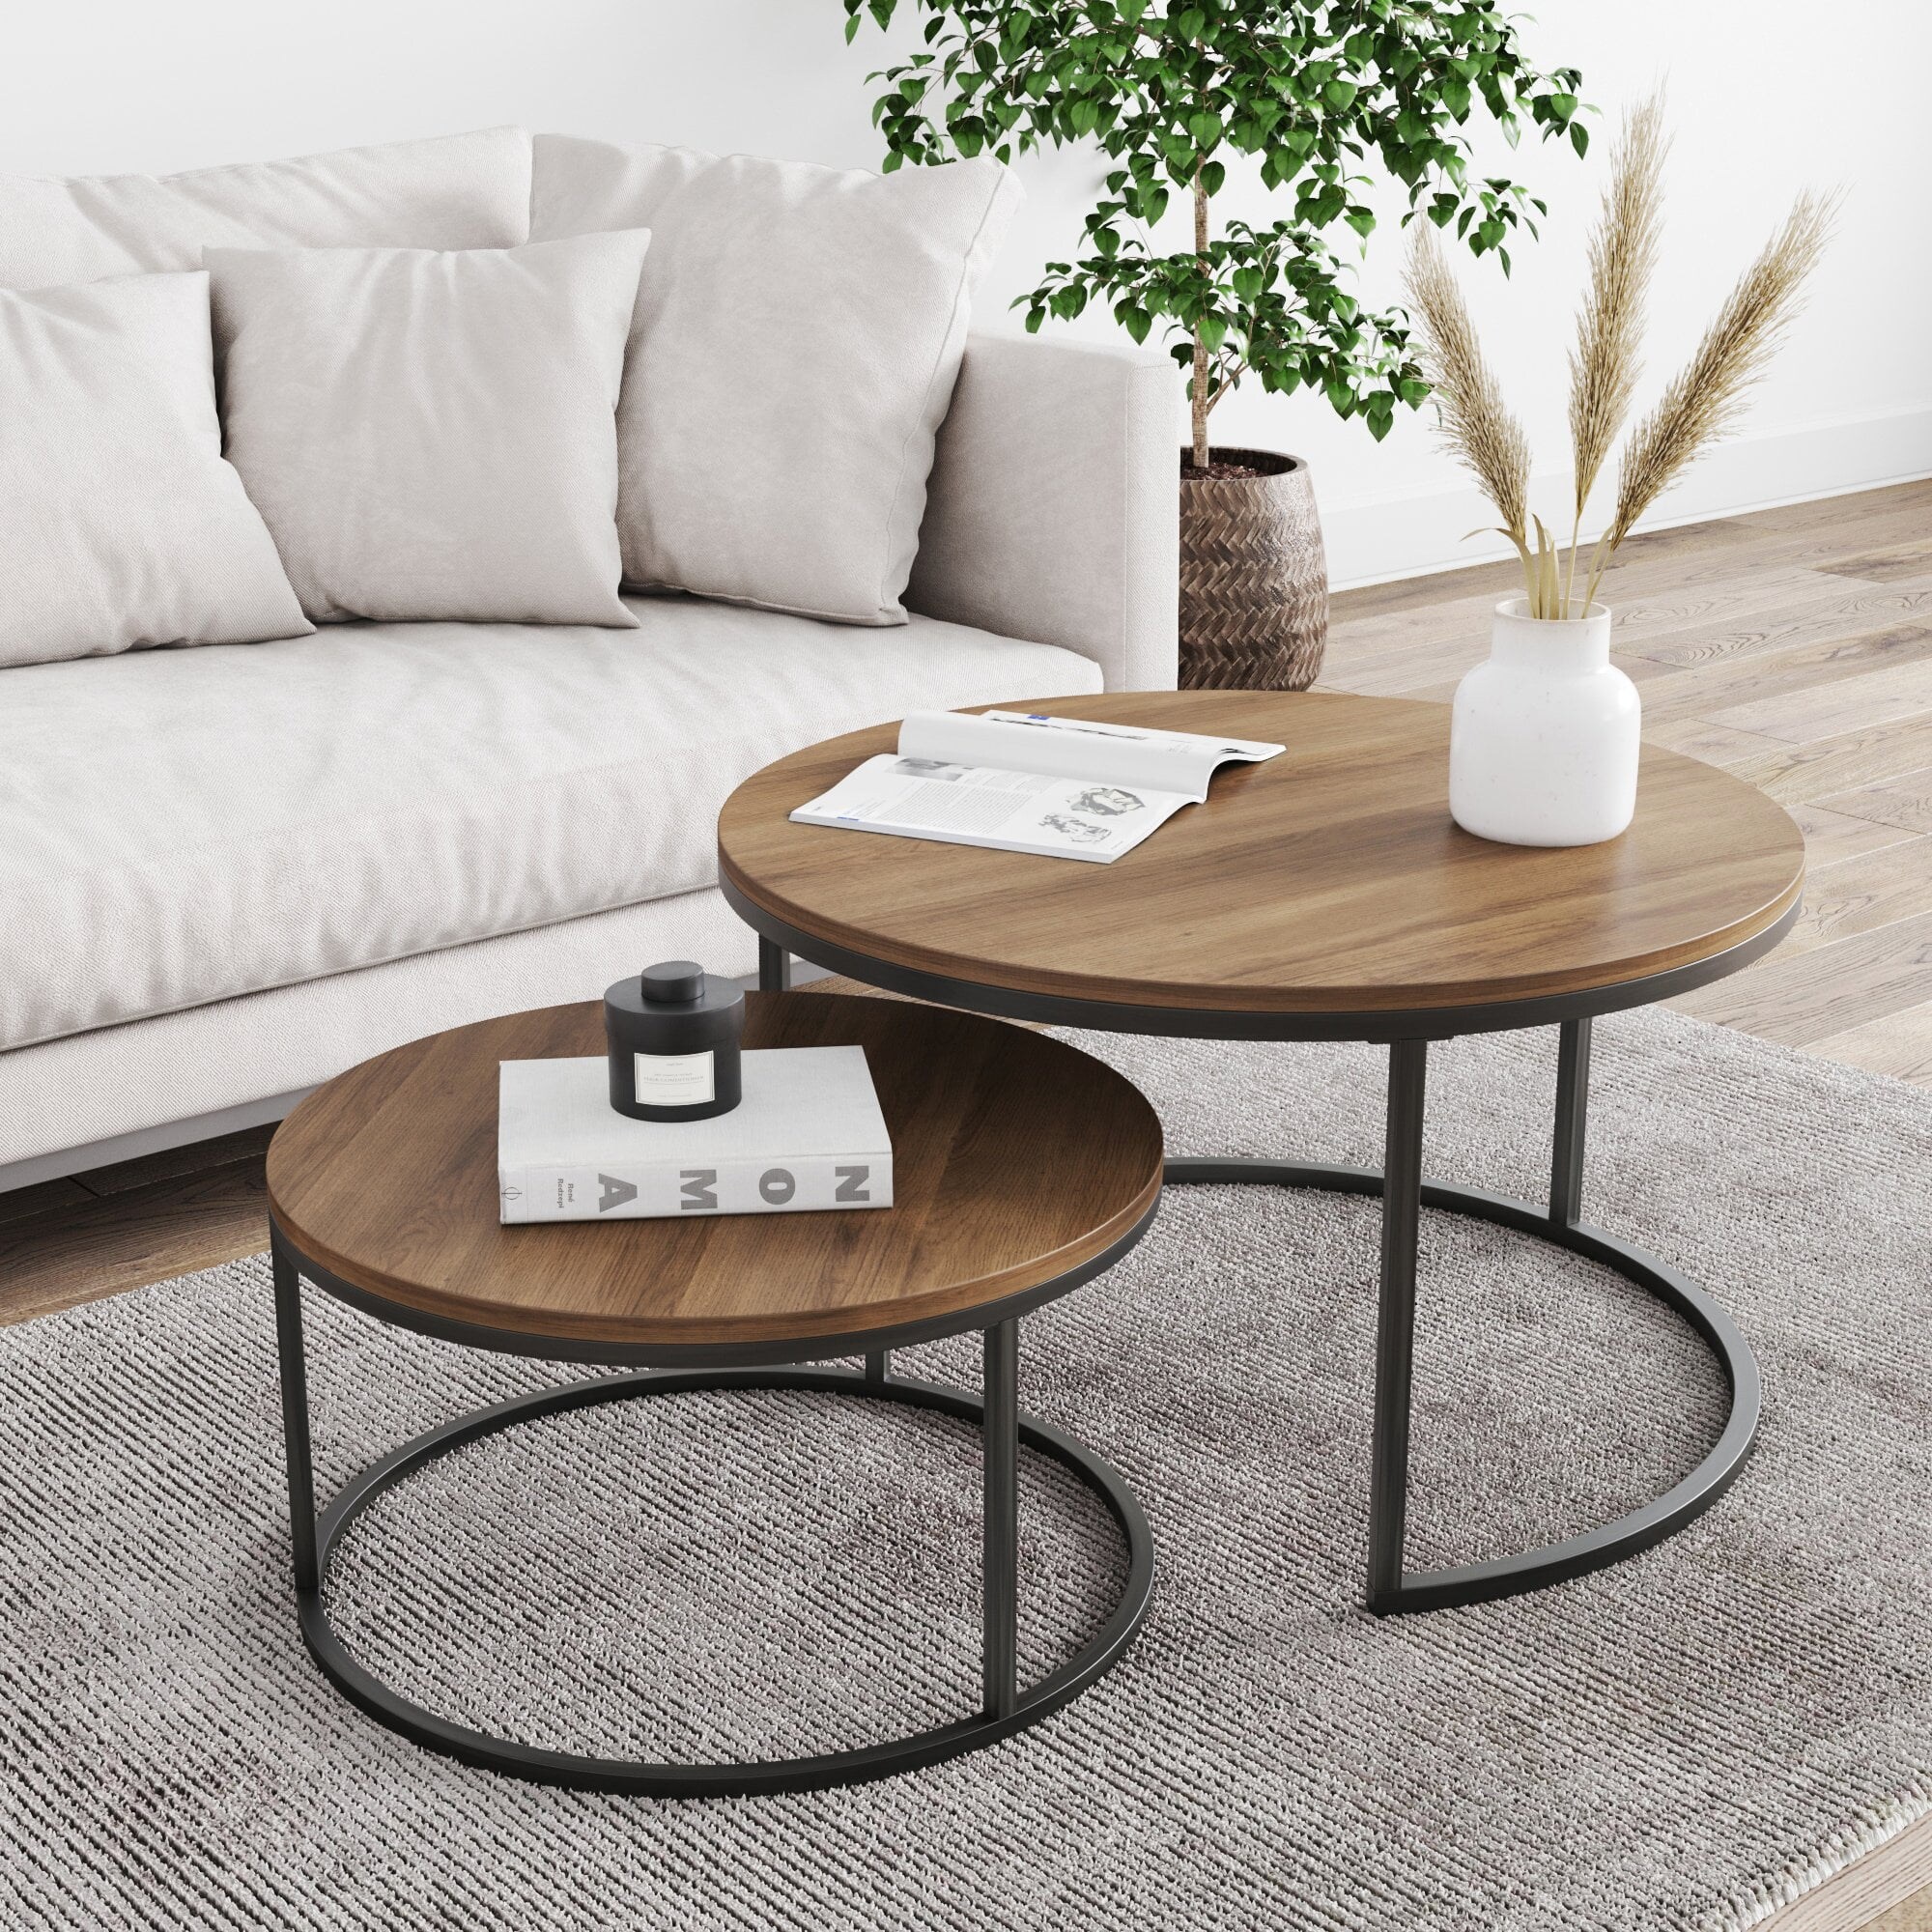 Global Pronex Stella Round Modern Nesting Coffee Table Set of 2, Stacking Living Room Accent Cocktail Tables with an Industrial Wood Finish